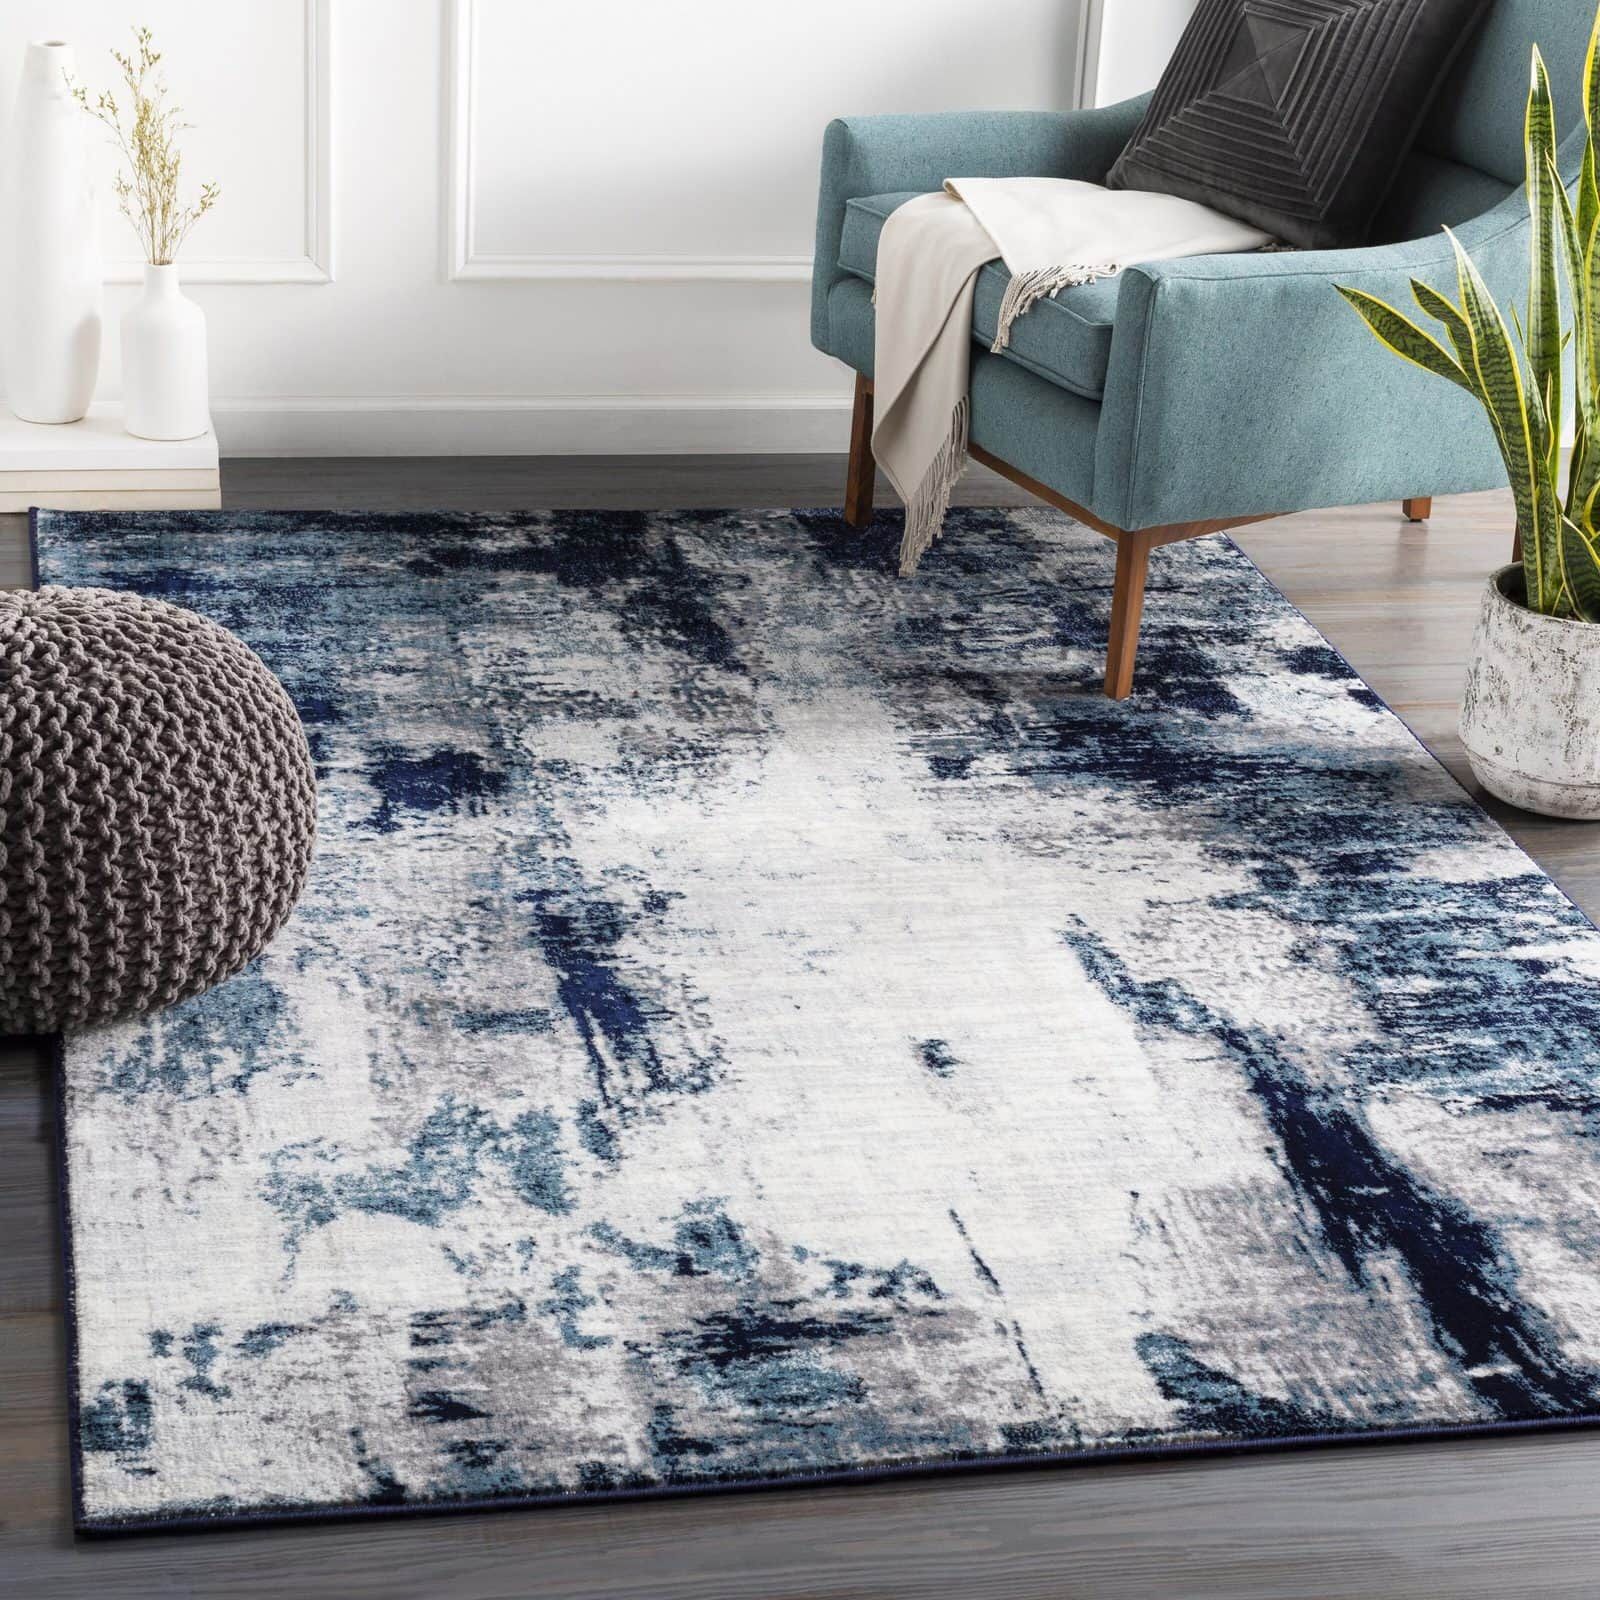 12 Best Navy Blue And White Rugs Inside Navy Blue Rugs (View 7 of 15)